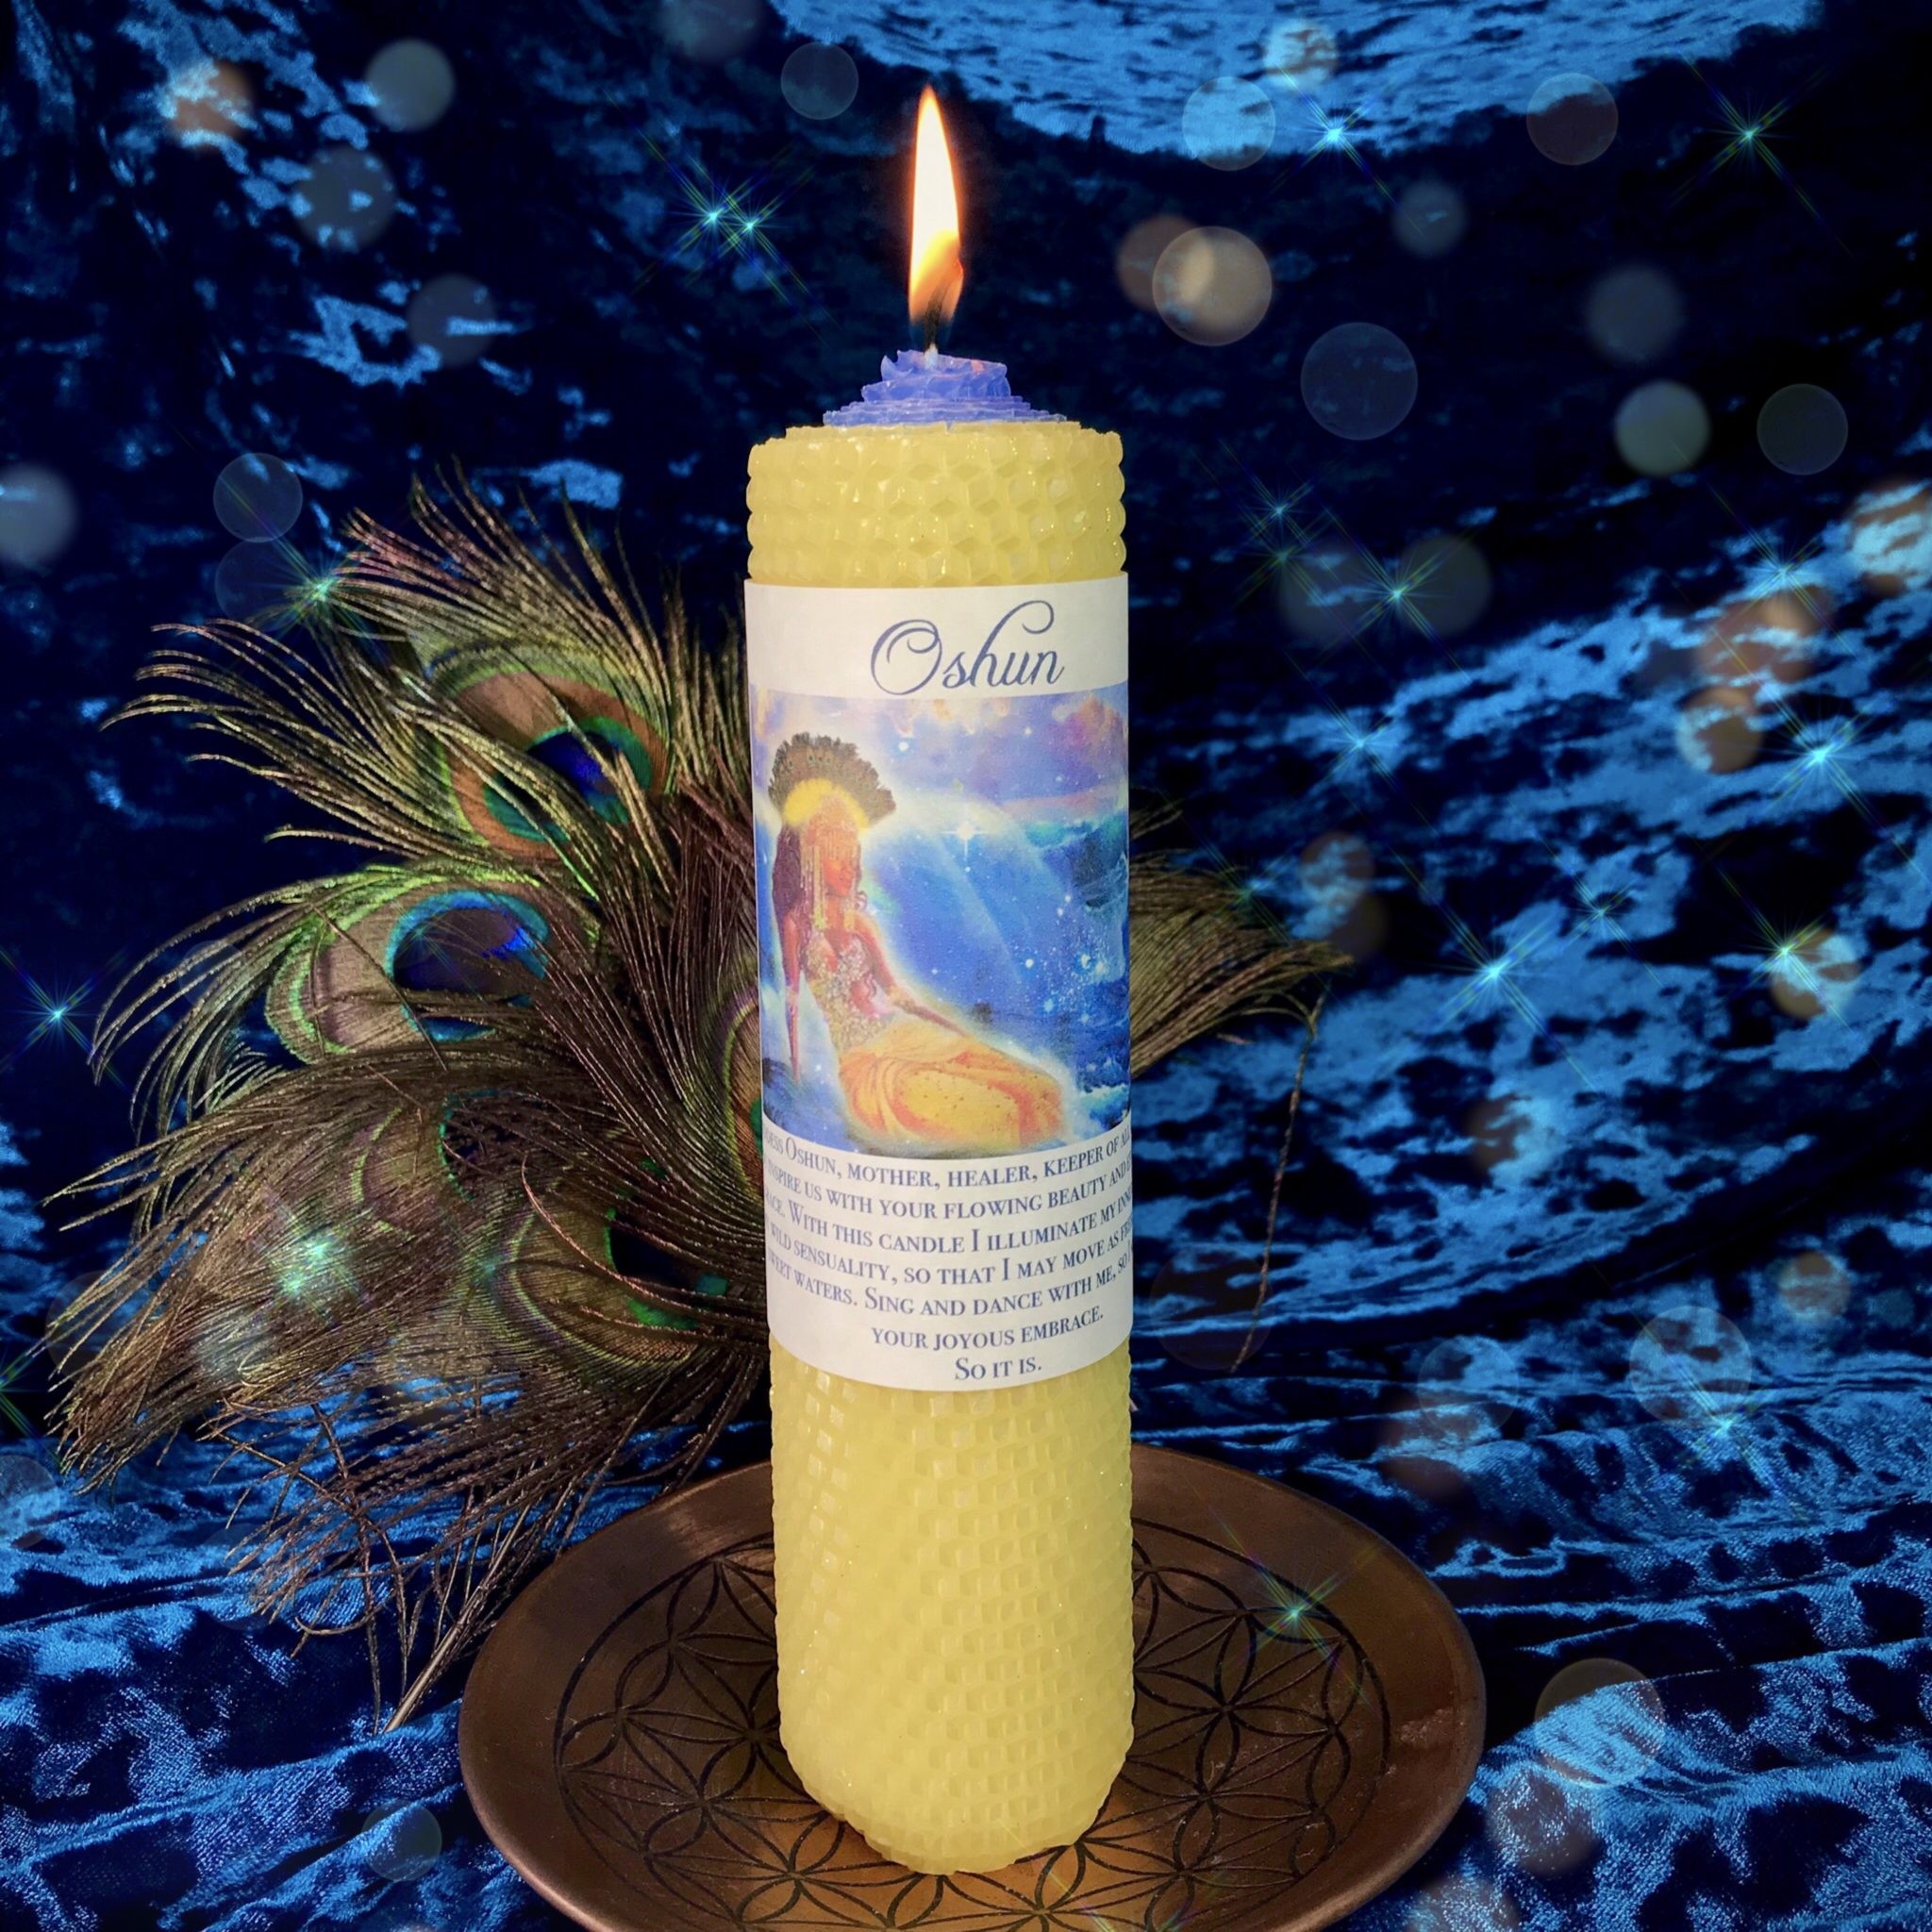 Sage Goddess Oshun Beeswax Intention Candle for healing and fertility image